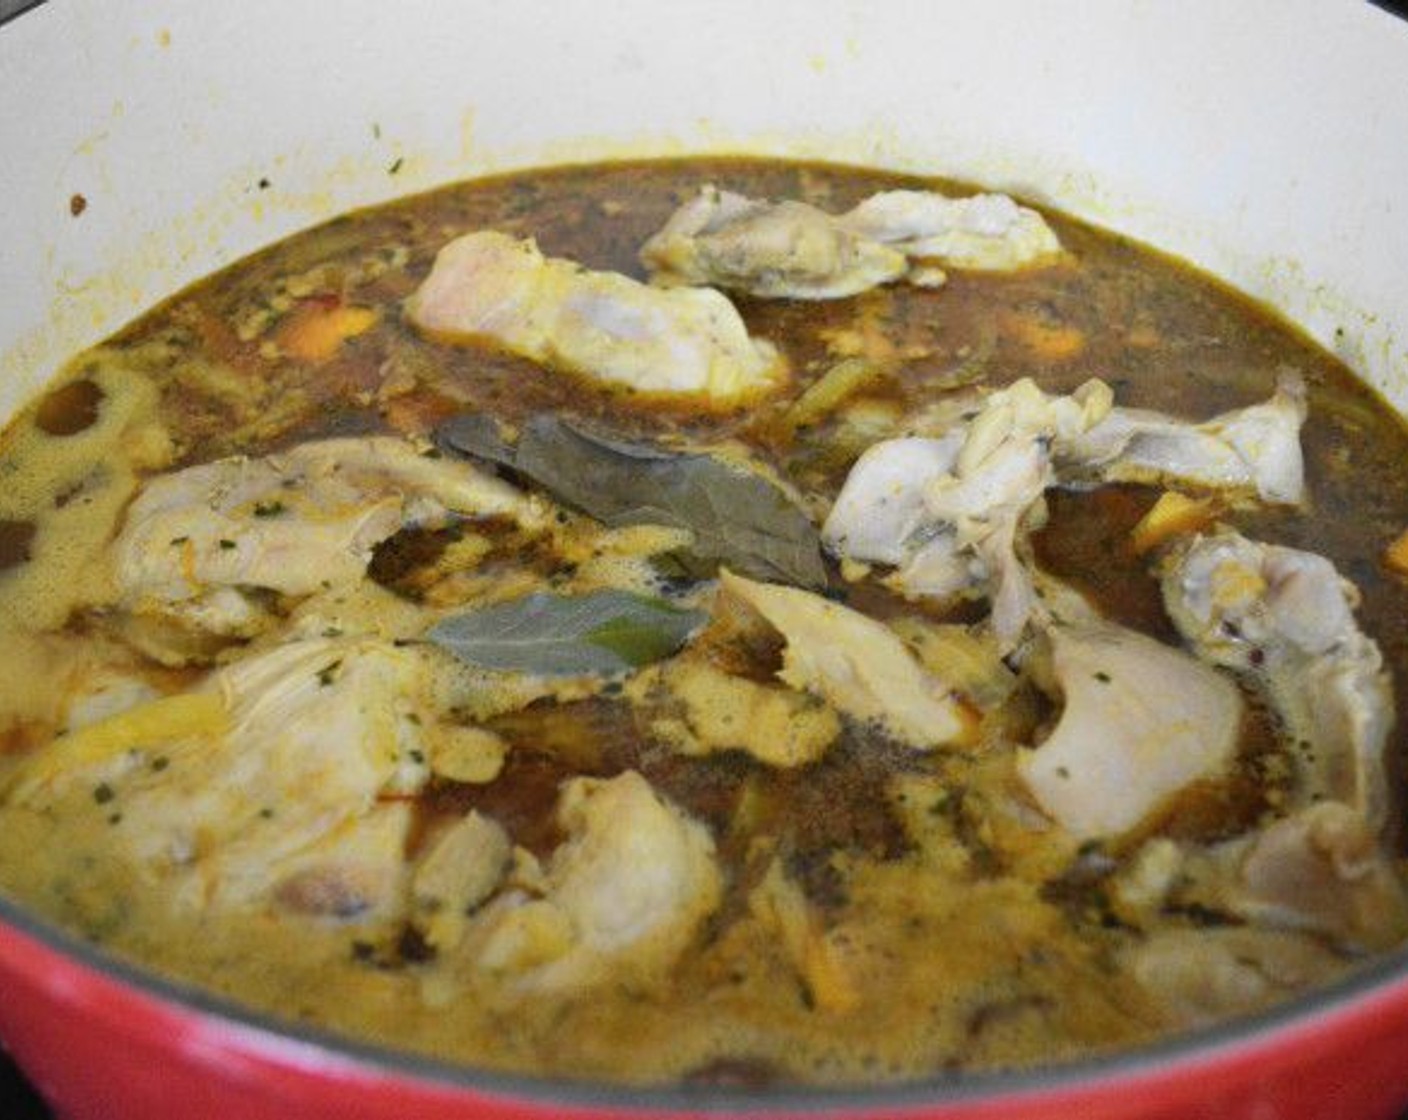 step 6 Return the chicken to the pot and stir everything well. Add the Bay Leaves (2) in last. Bring the pot to a boil again and reduce it to a simmer. Let the chicken simmer for 2 hours.